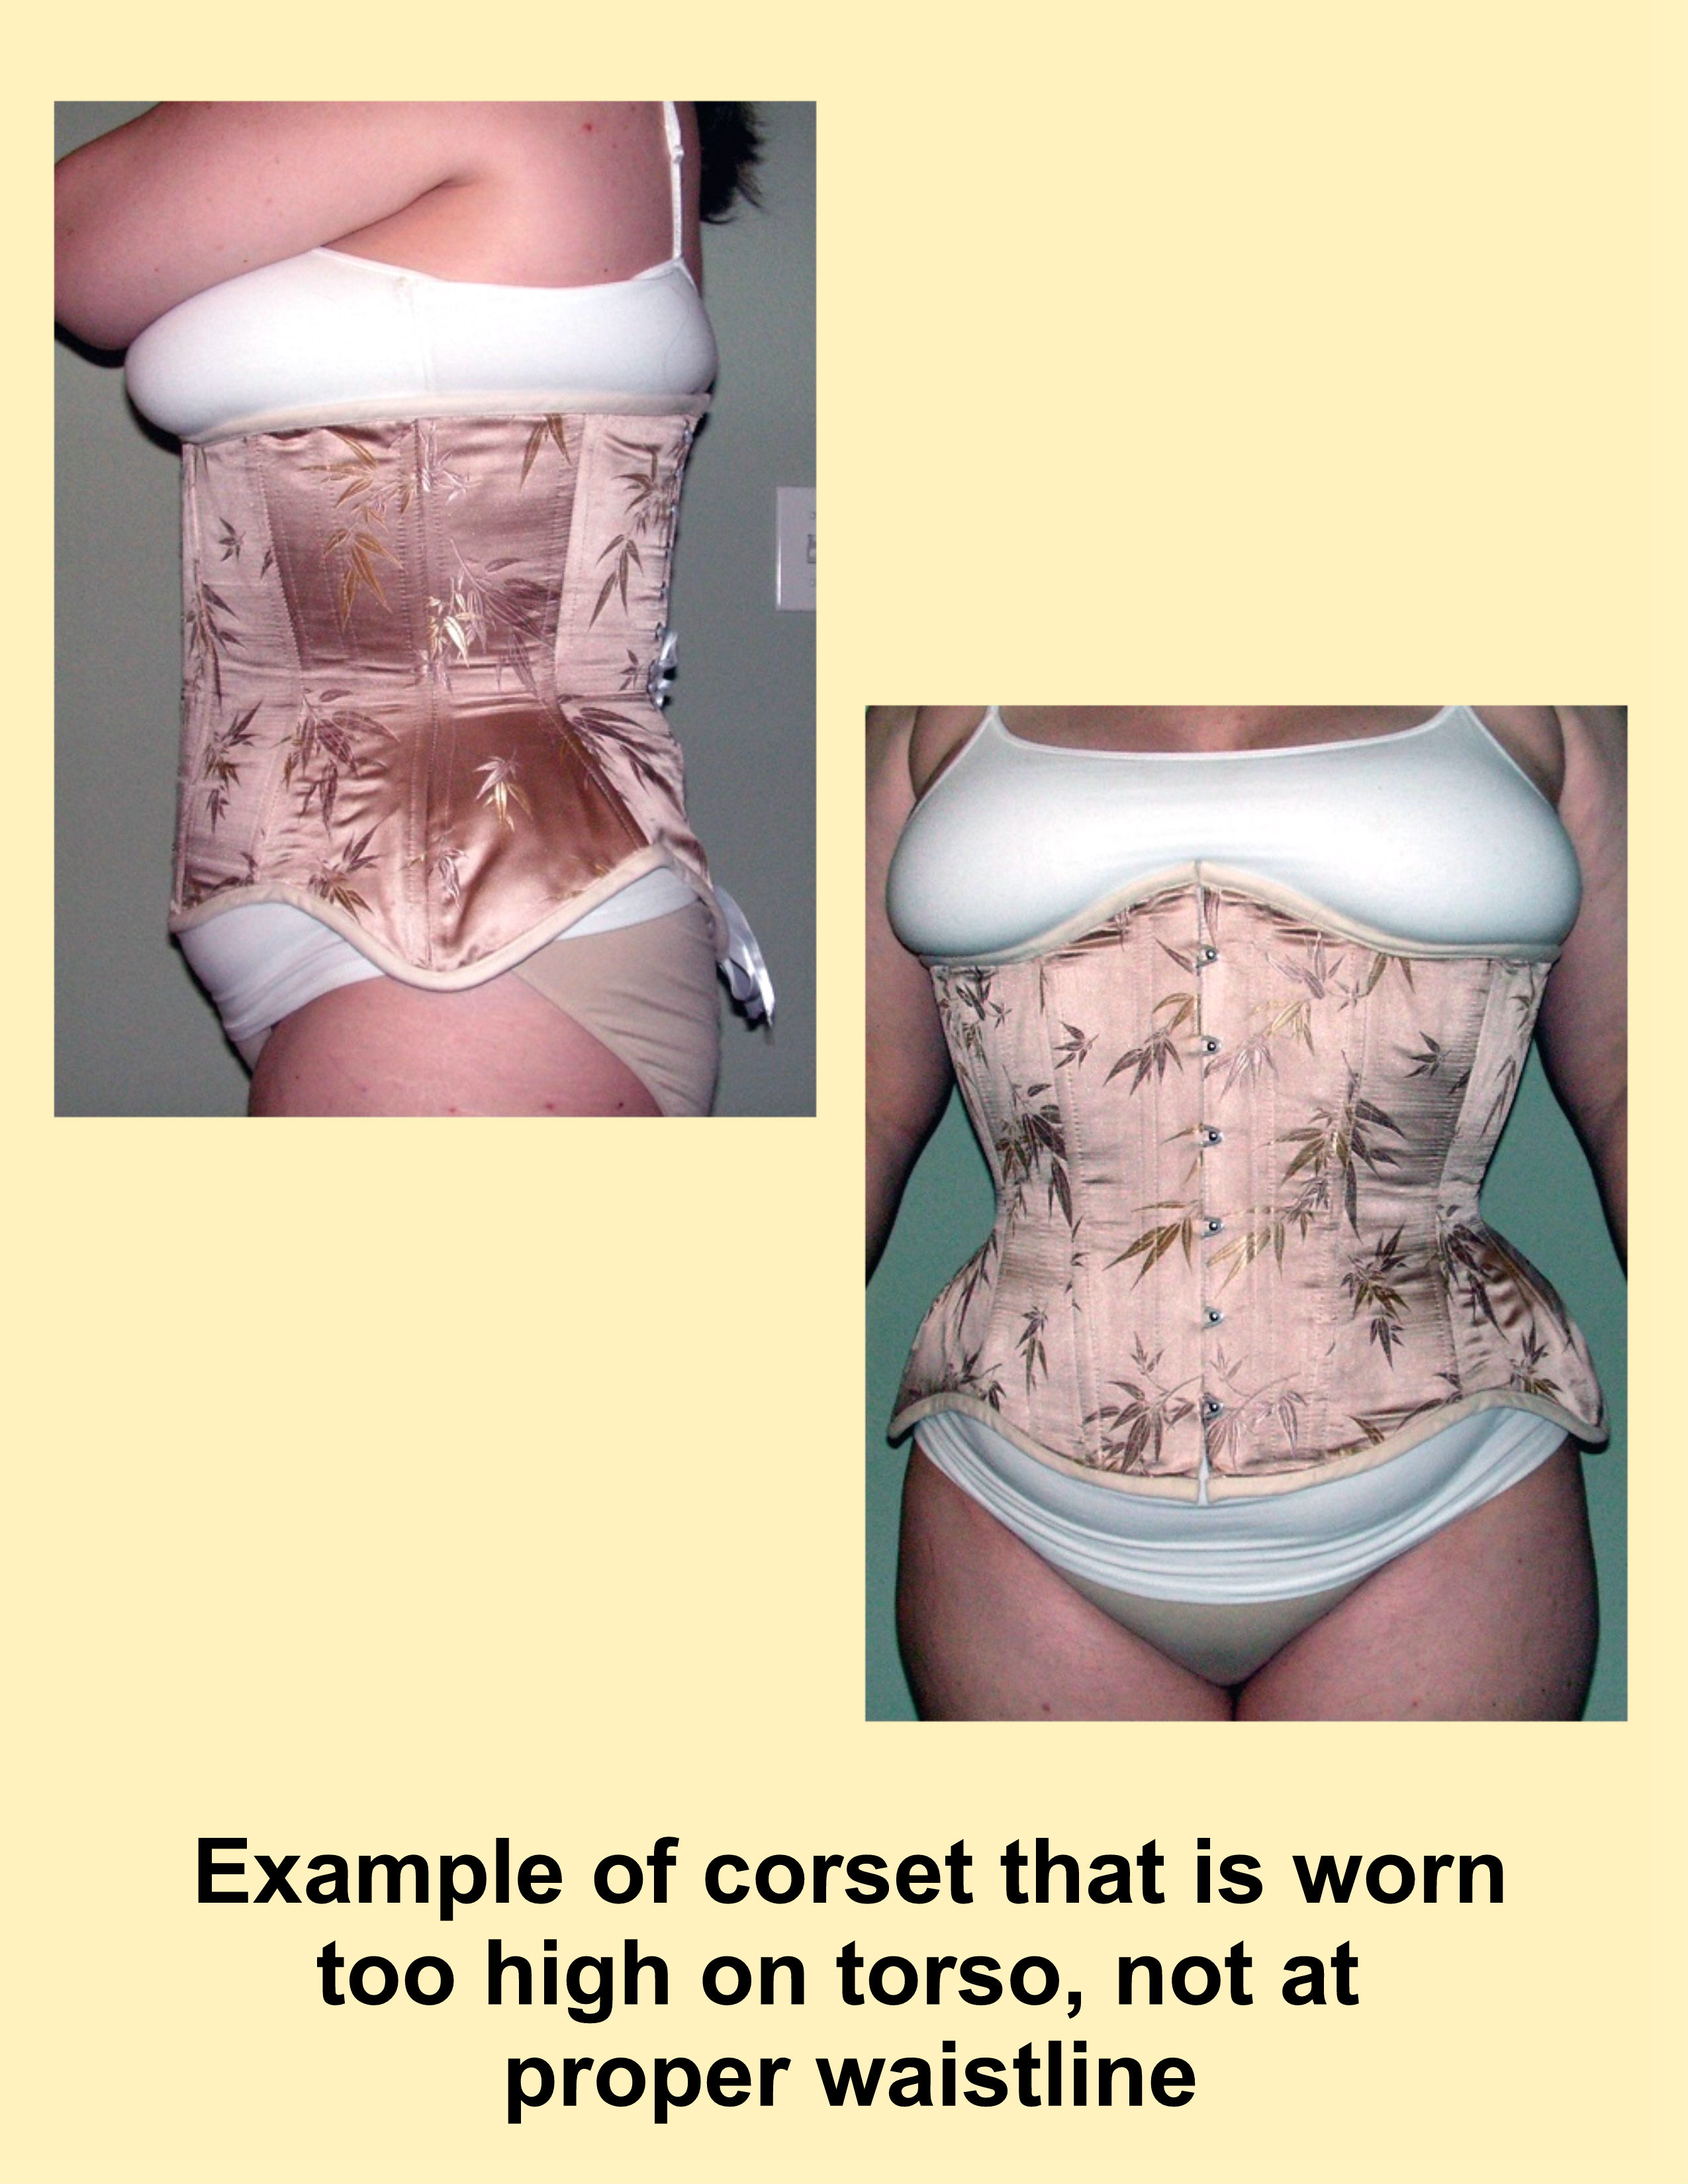 Corsets Were Always Terrible, But Maybe Less Terrible Than You